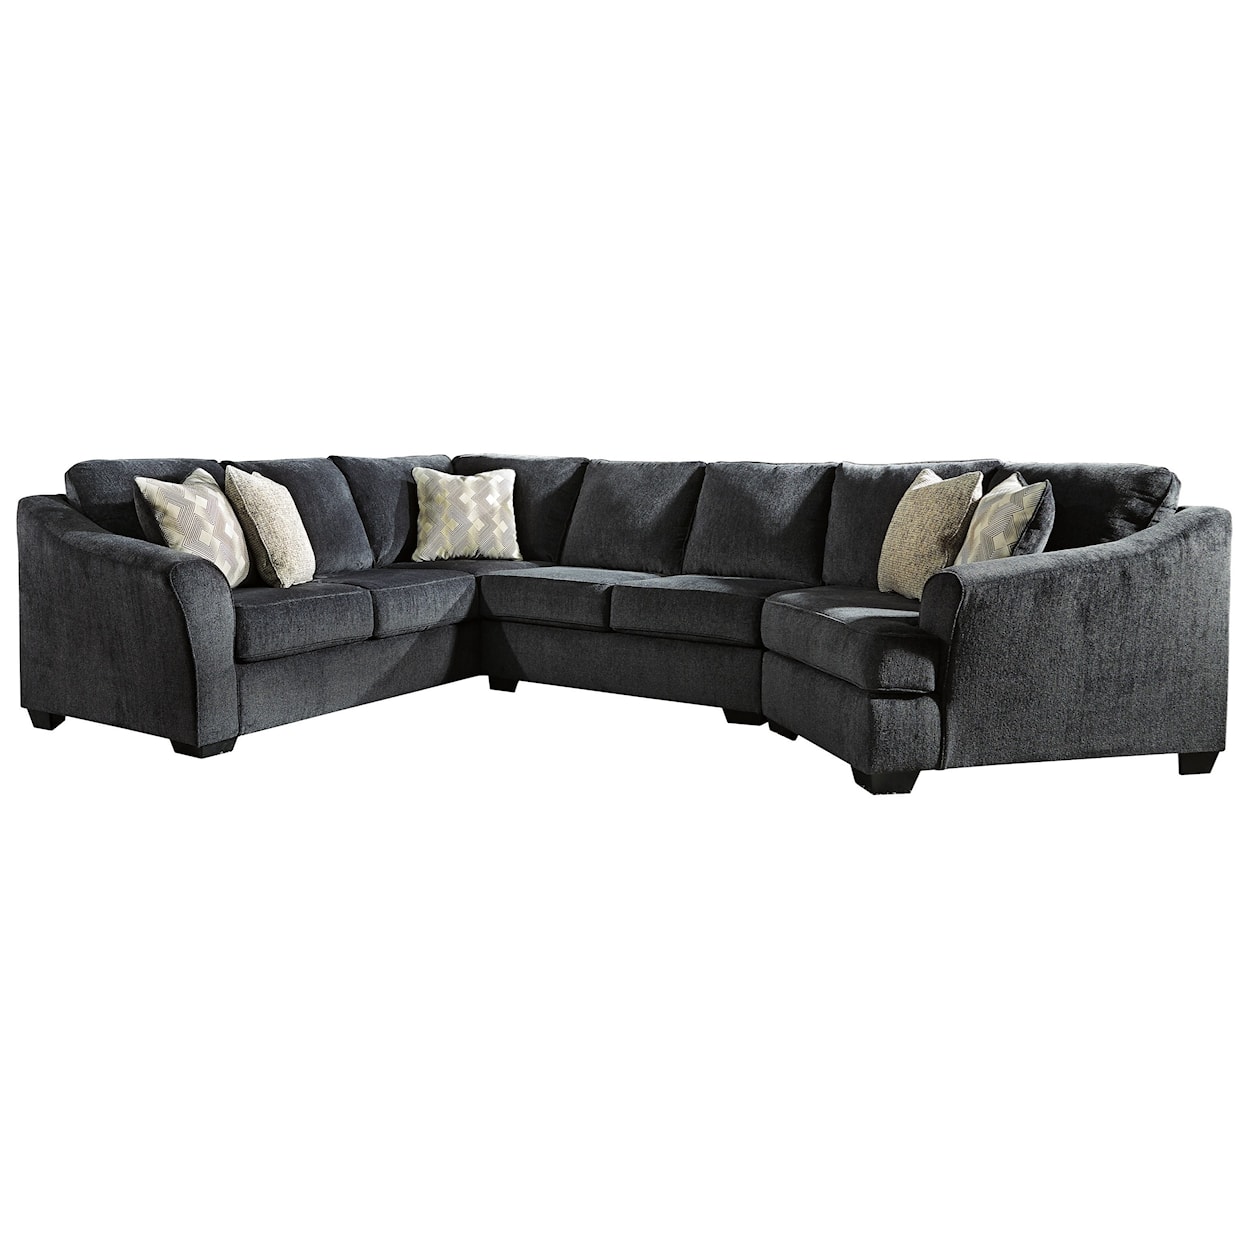 Signature Eltmann 3-Piece Sectional with Right Cuddler